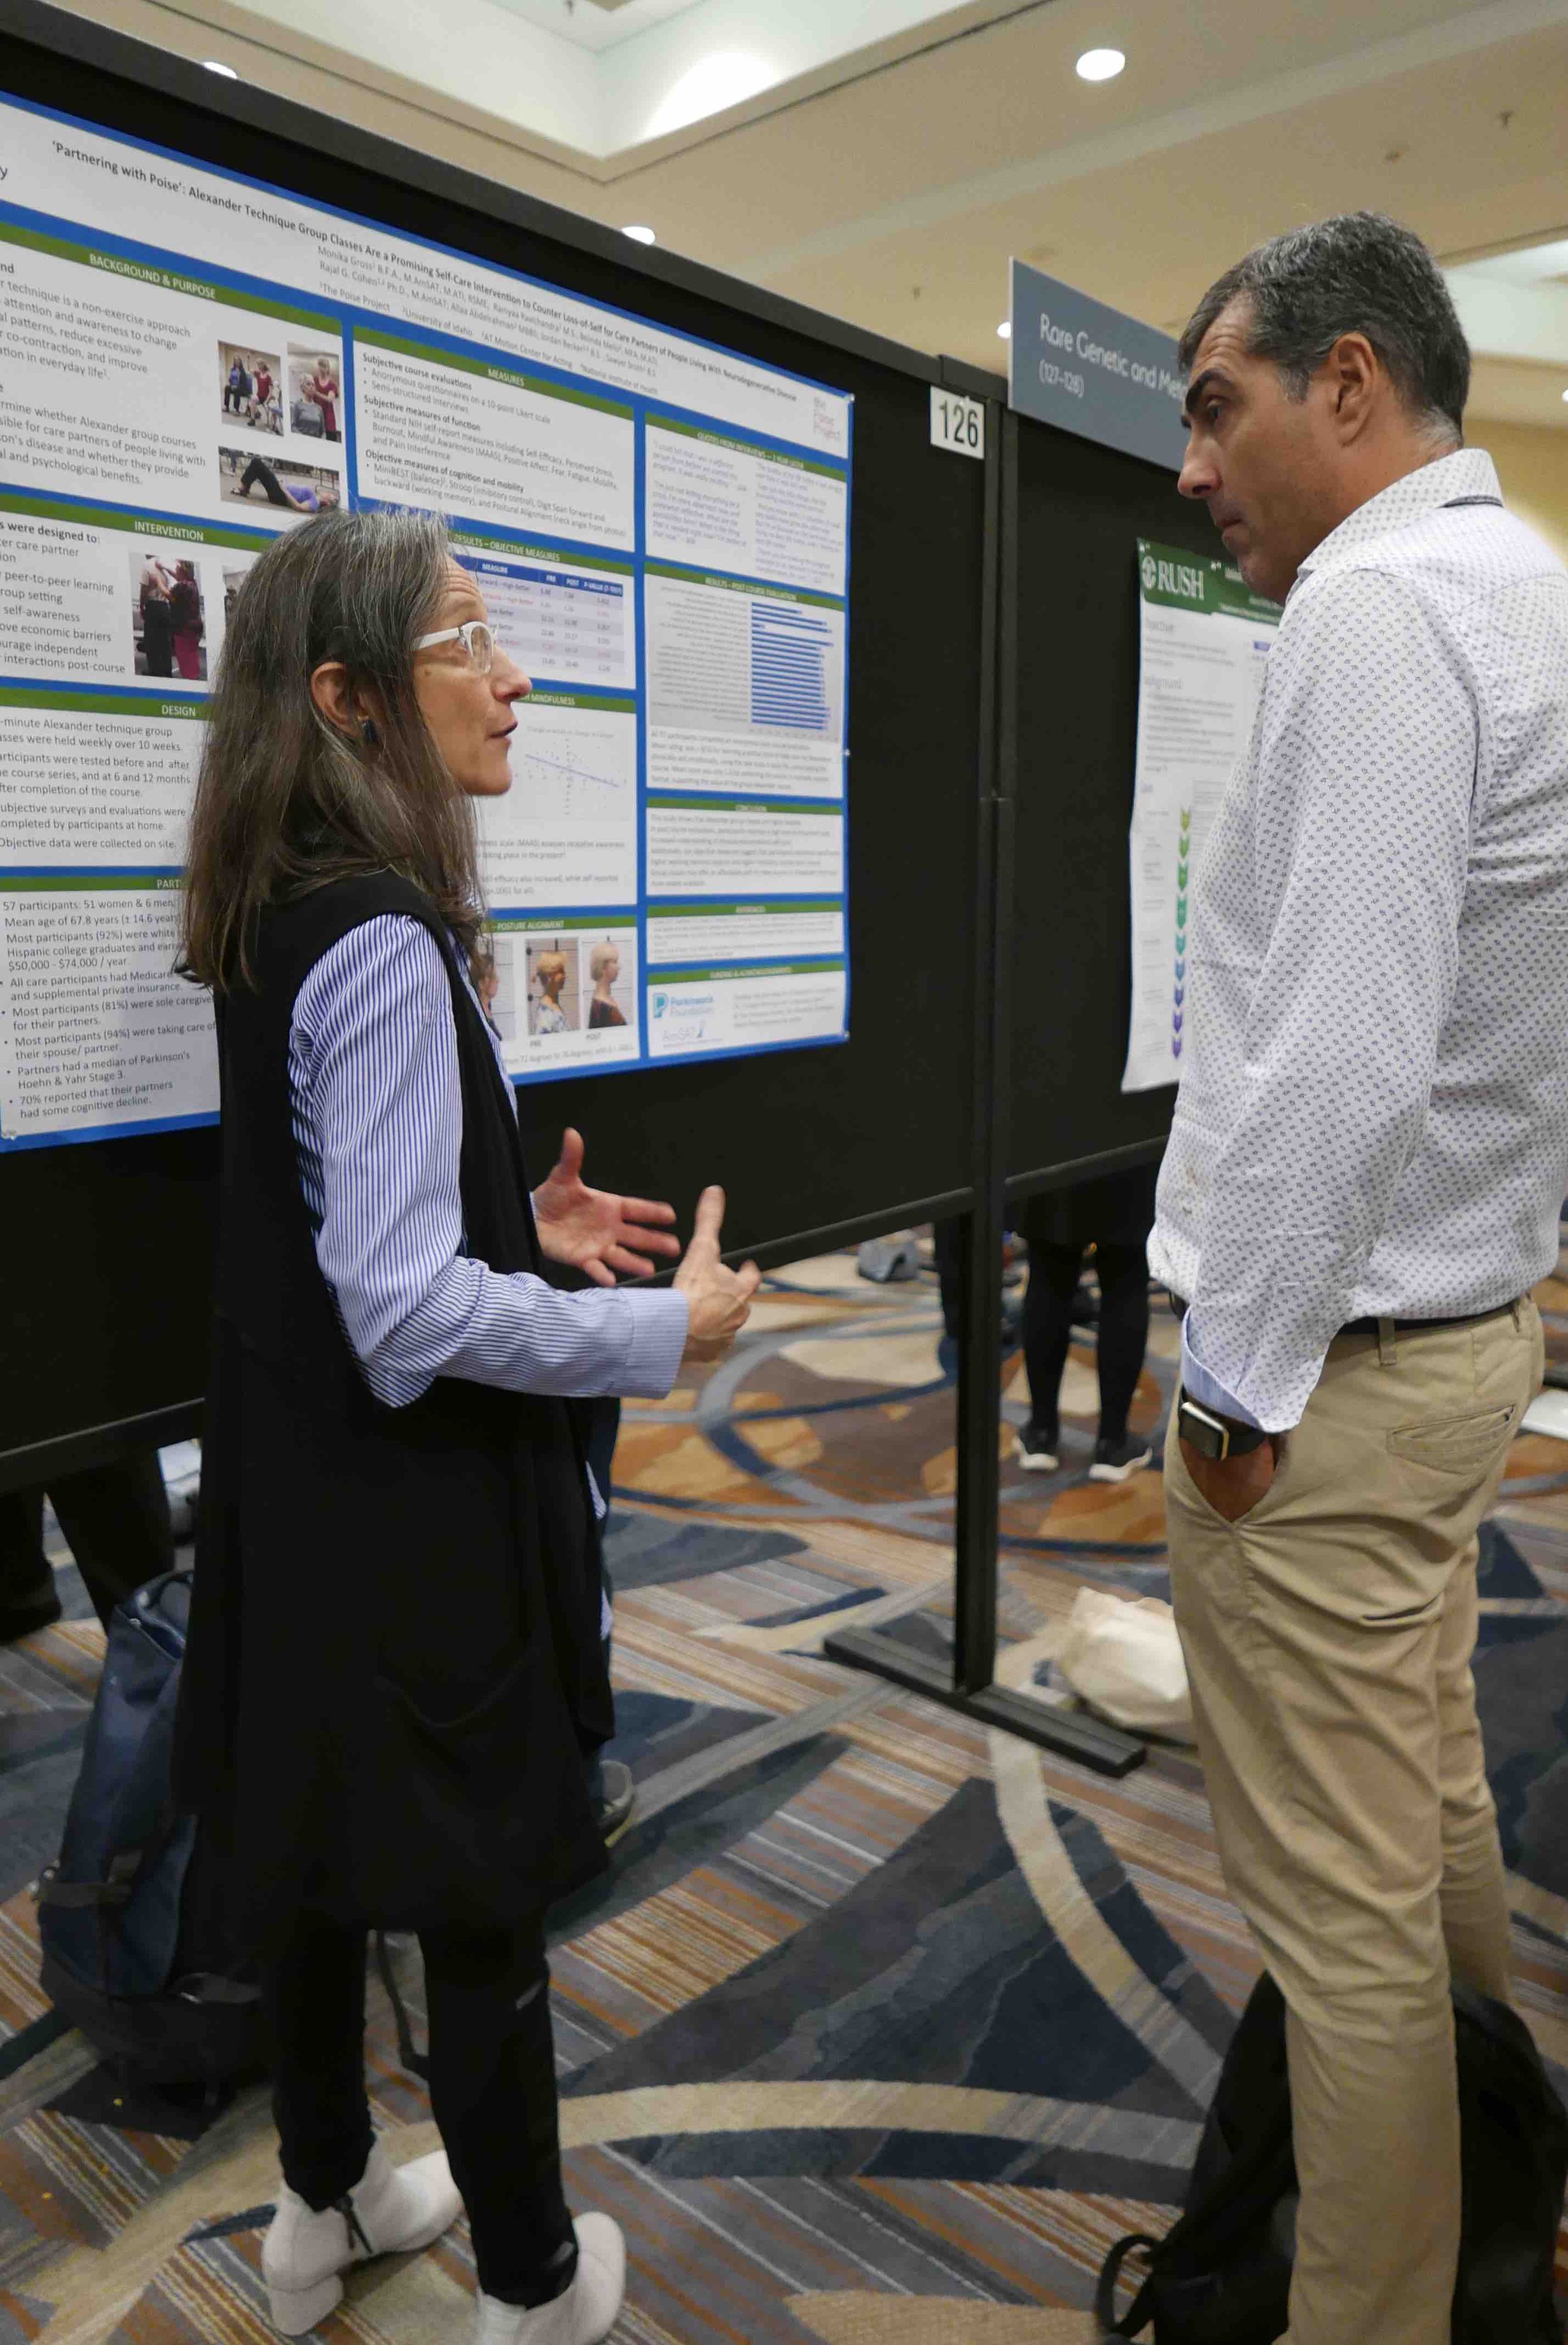 MDS PAS 2020 poster session-small.jpg